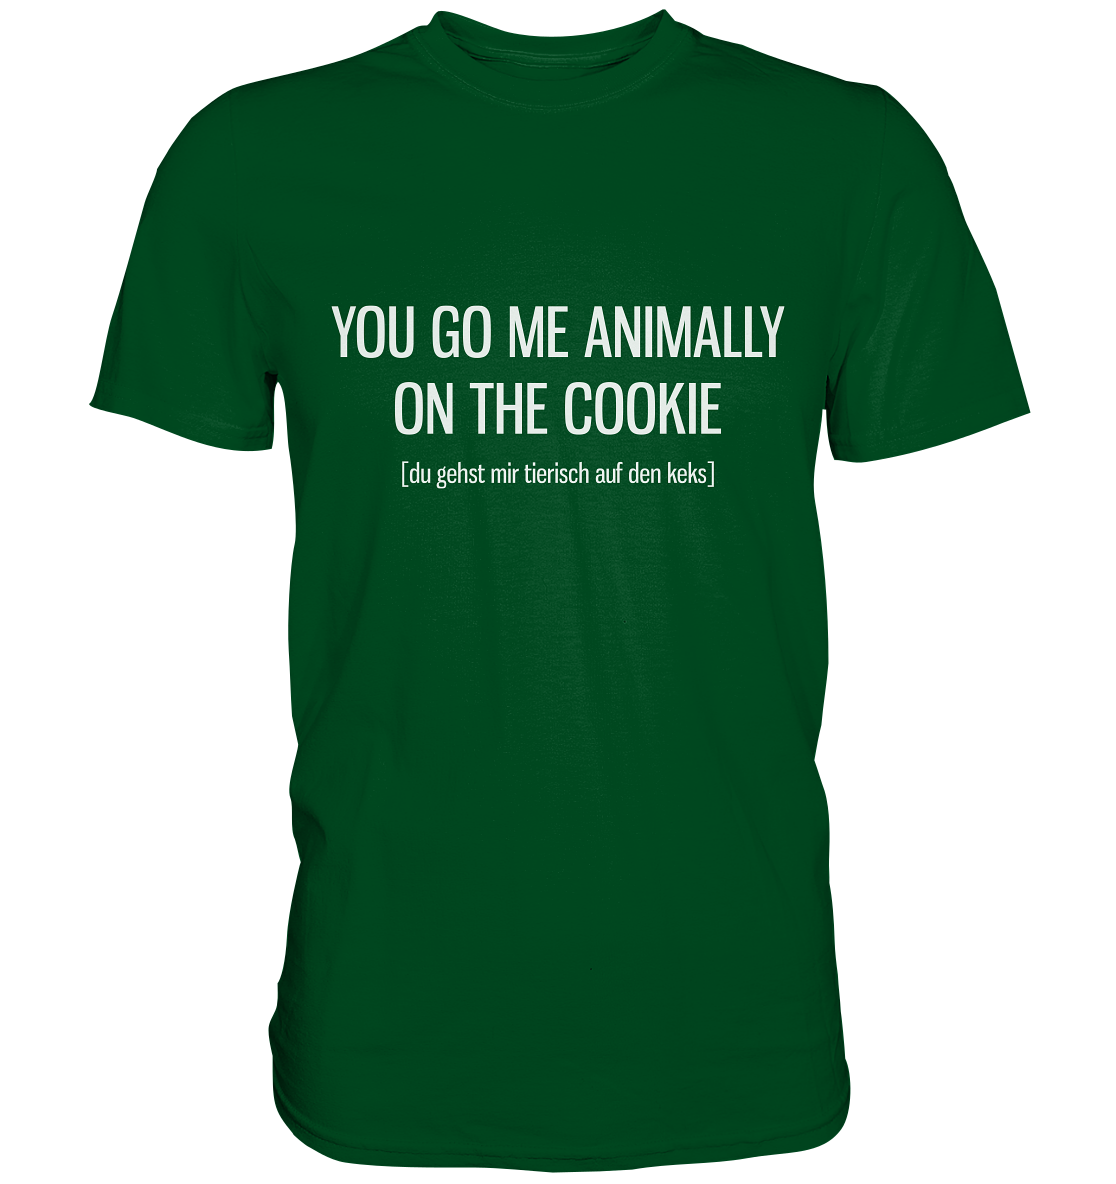 You go me animally on the cookie. Englisch - Unisex Premium Shirt